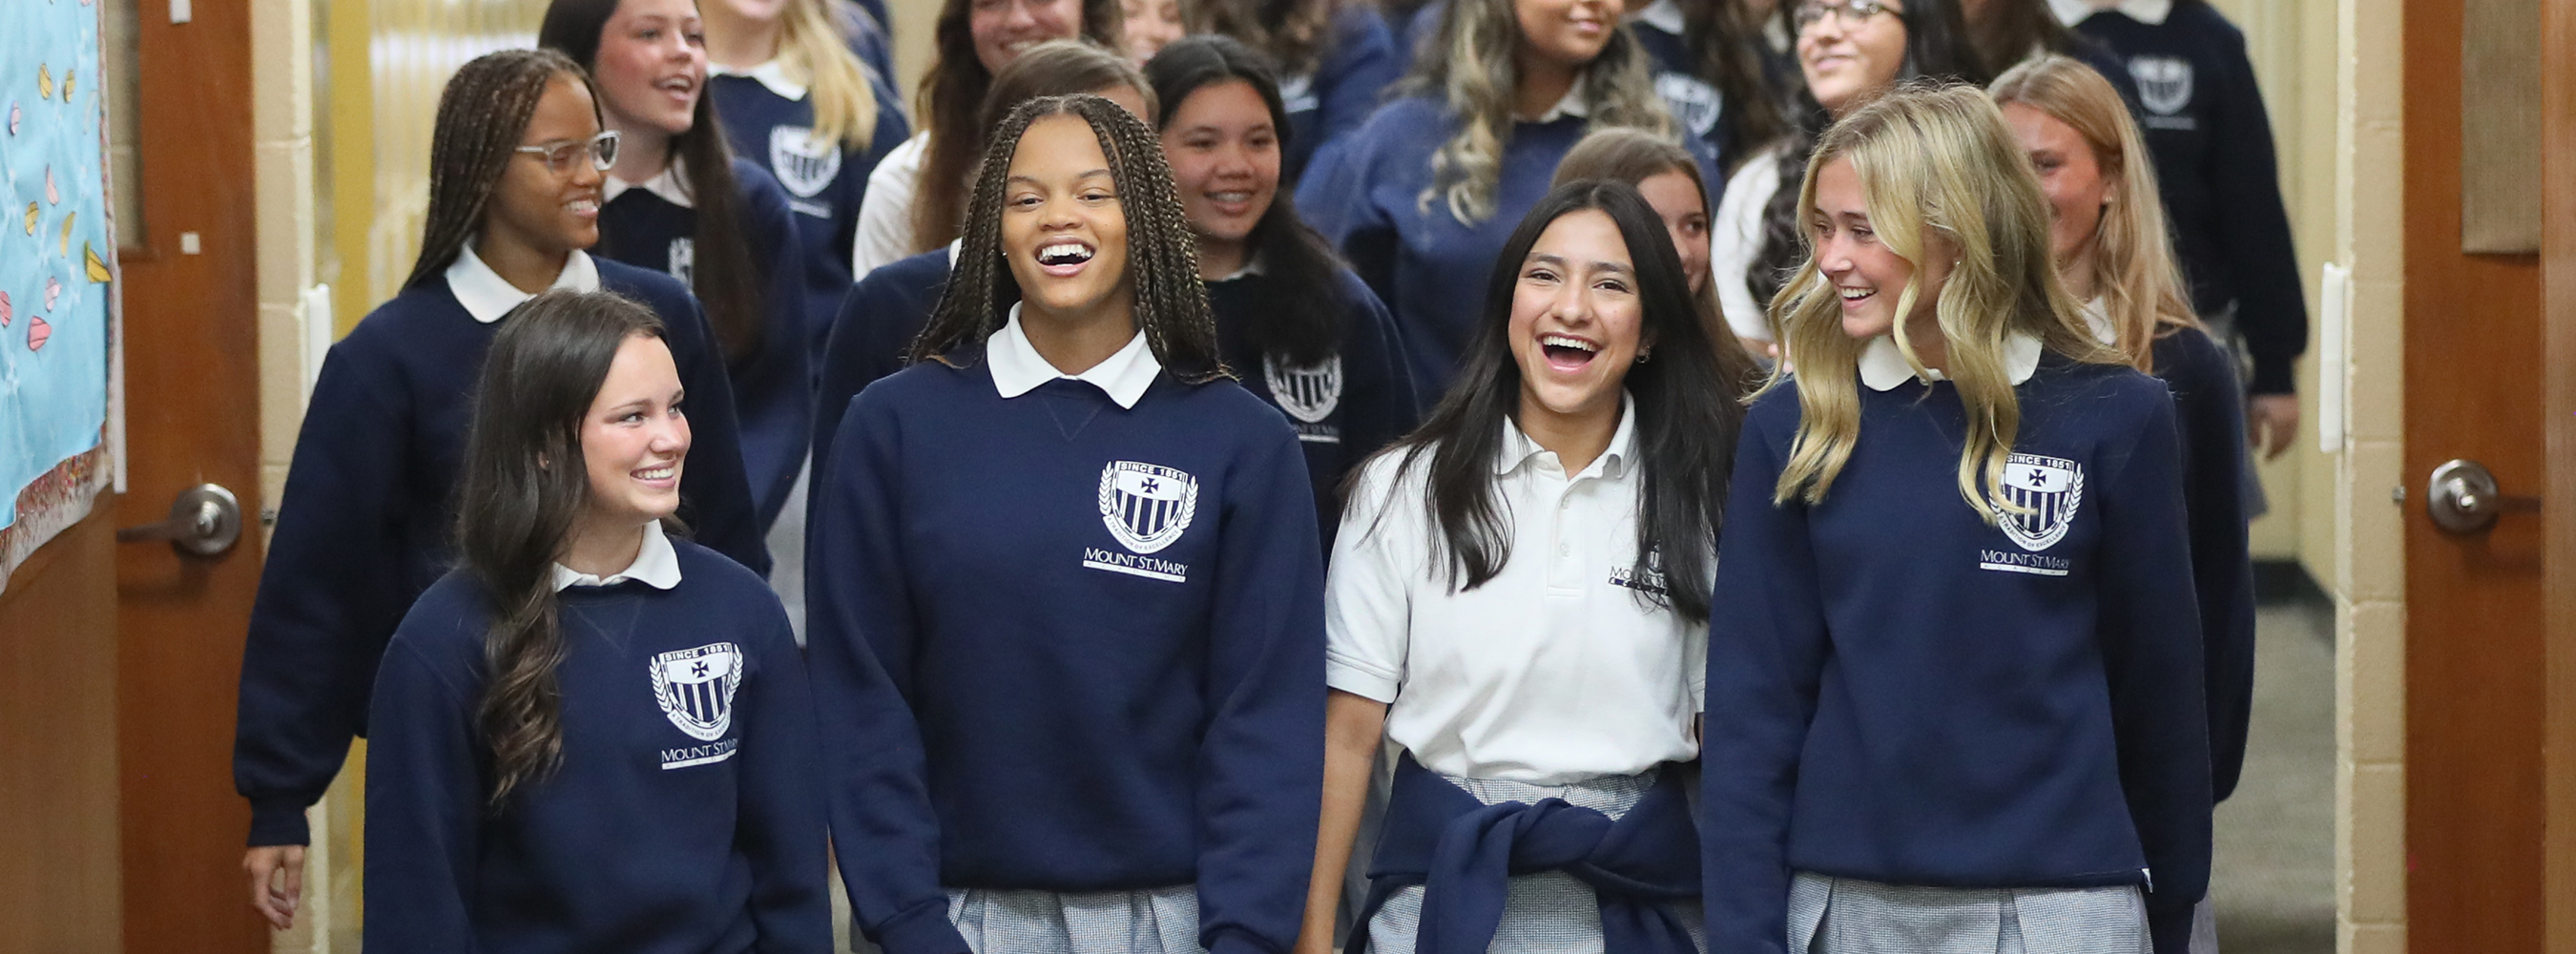 image of students smiling and talking while walking in hallway of school